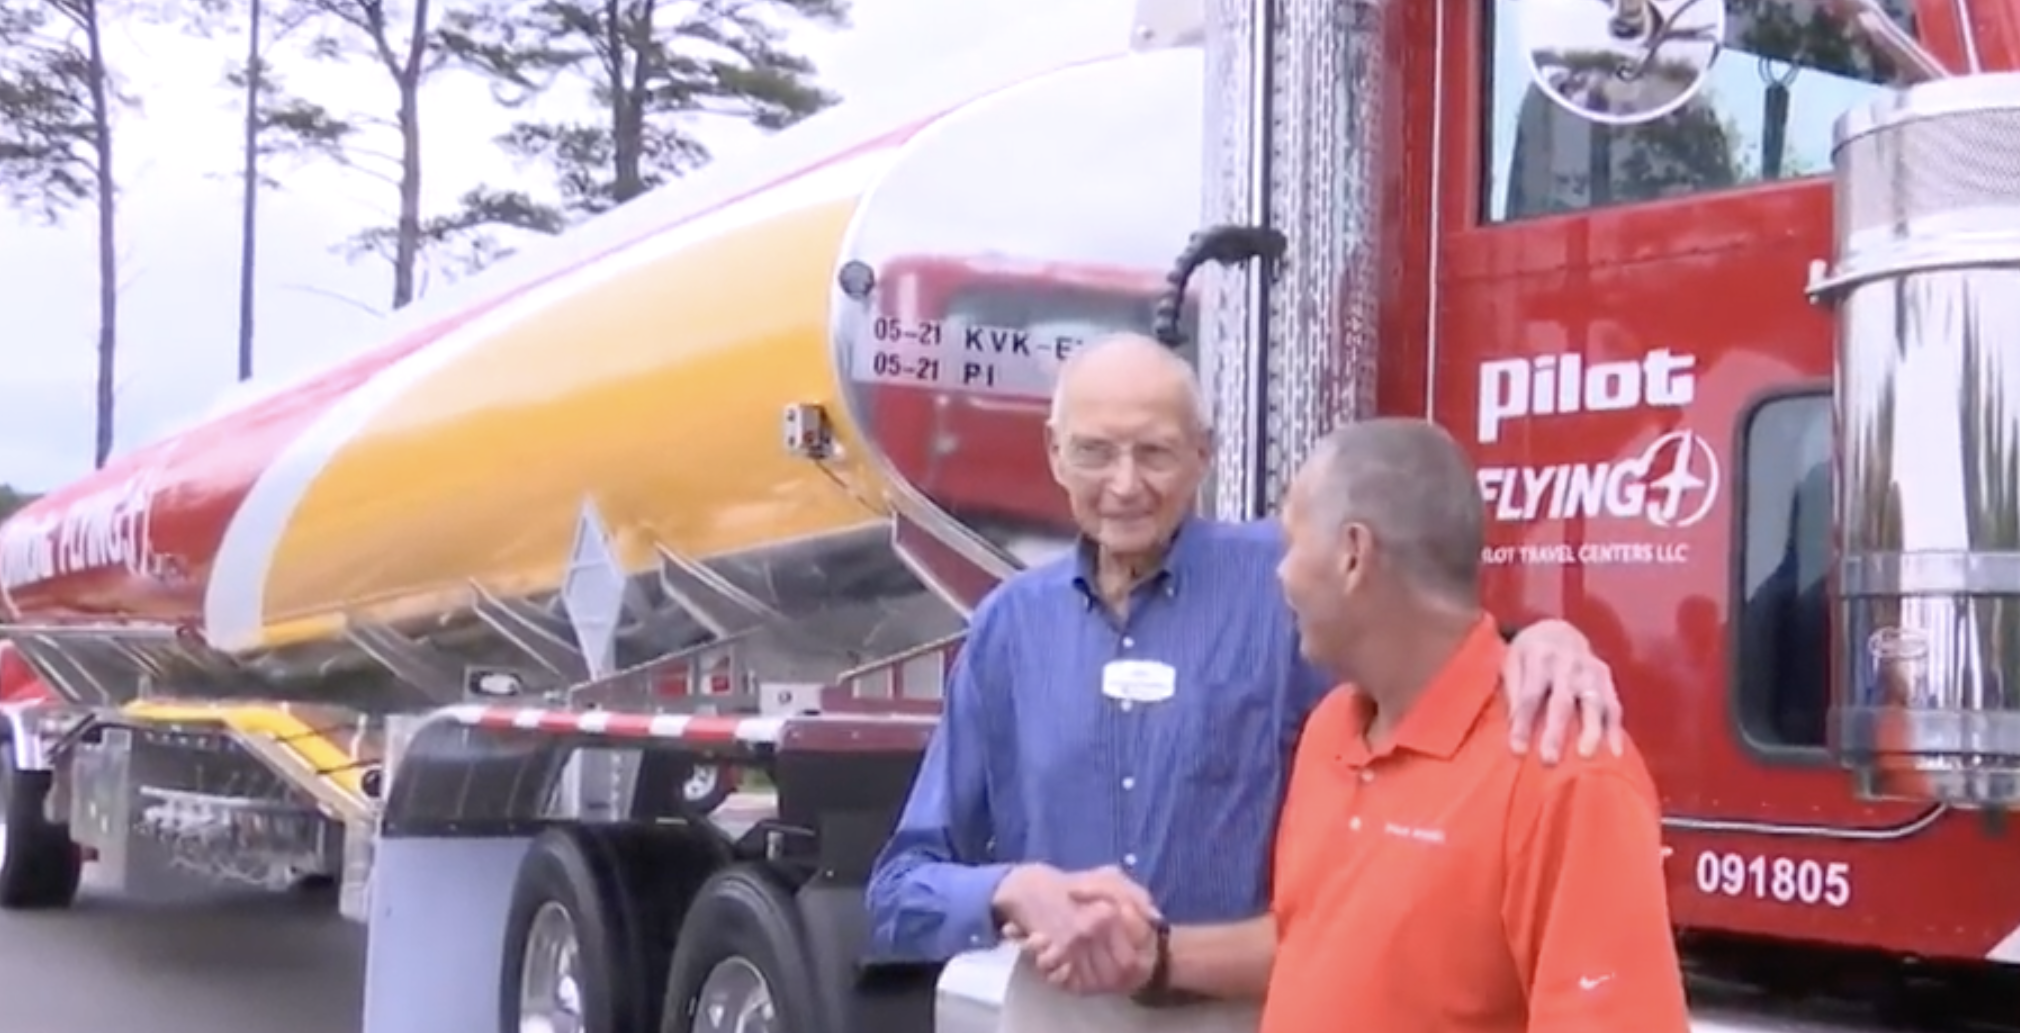 Second generation lead driver gifted “dream truck” in recognition of his family’s hard work